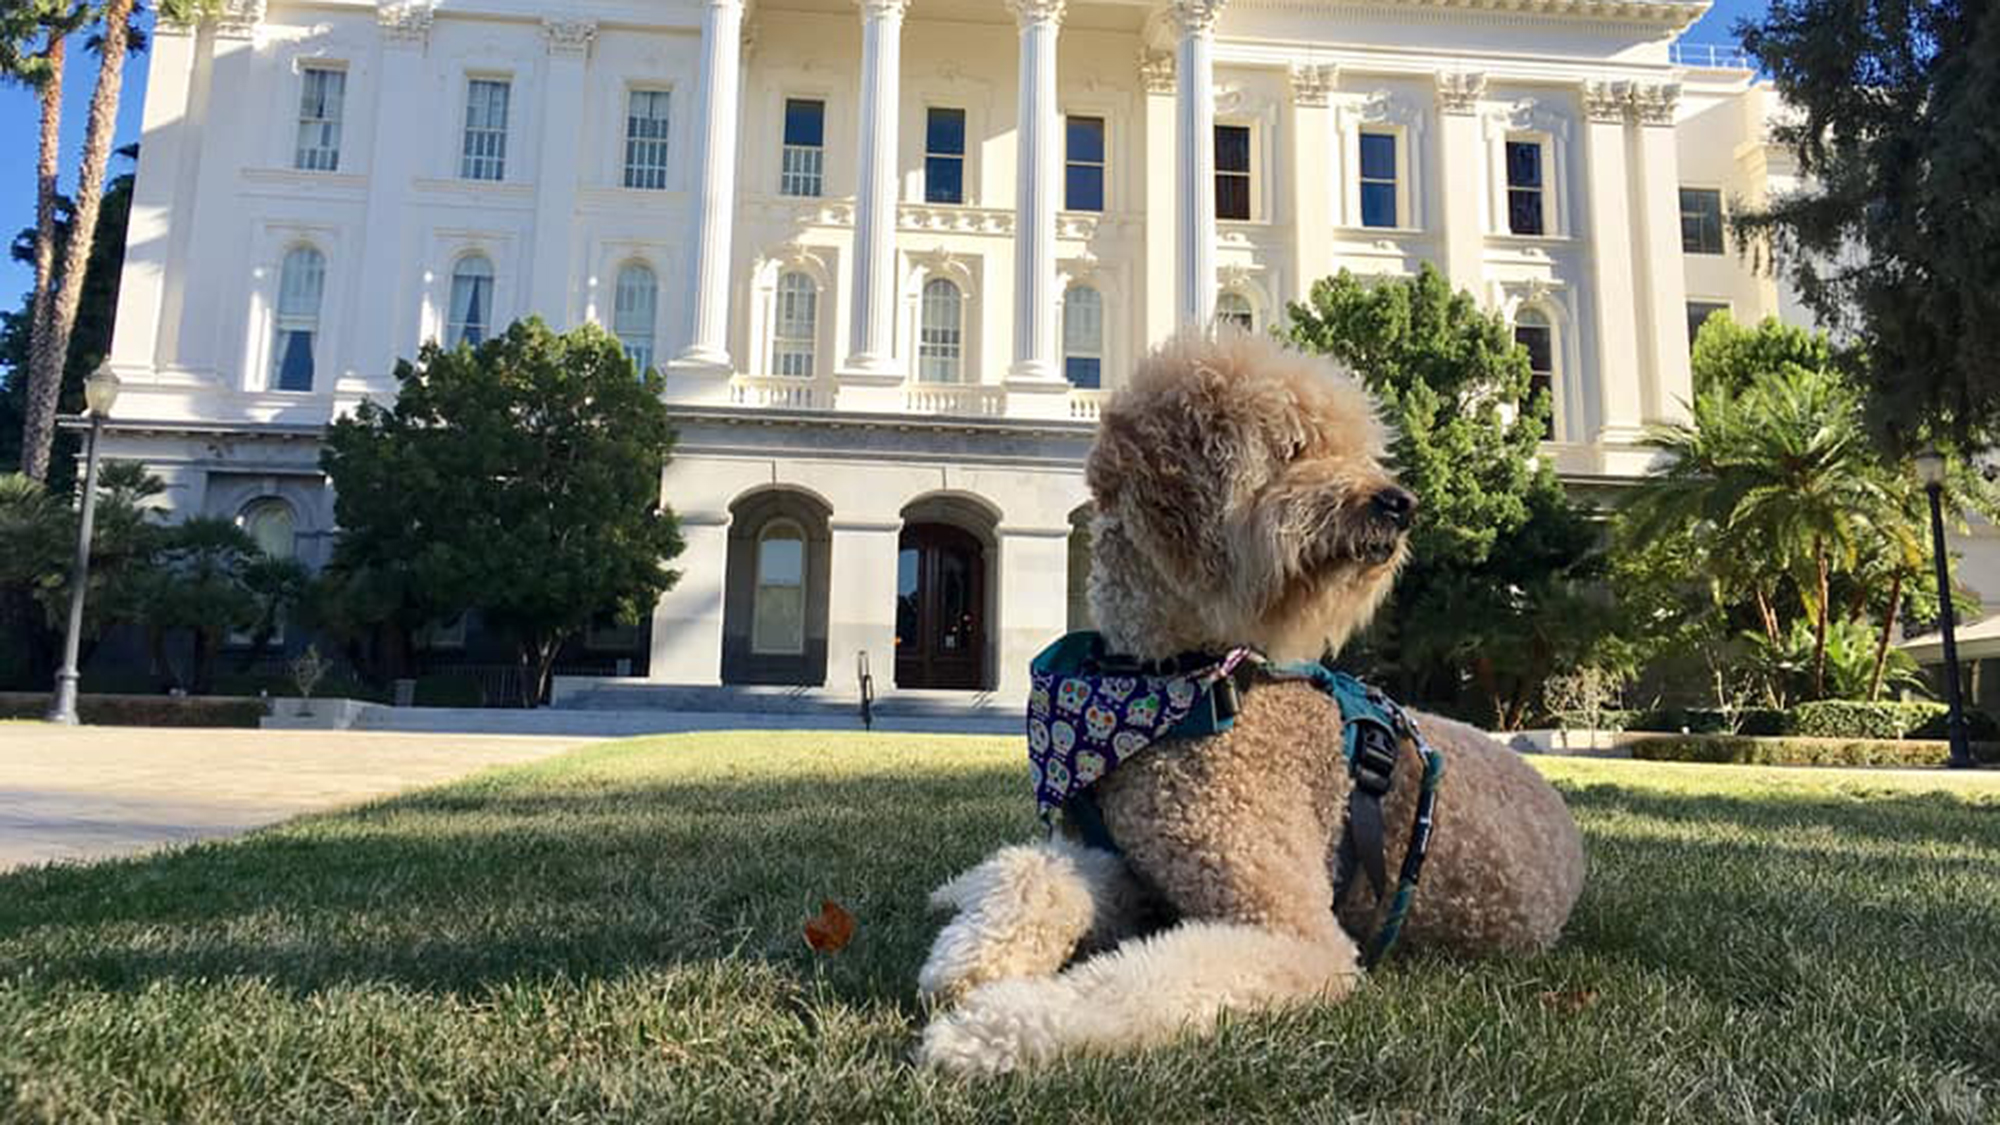 A beige-coated dog lies on the grass, wearing a colorful bandana and blue harness. Behind the dog stands a large white historic building with tall columns and many windows, framed by trees against a clear blue sky. This is an ideal location for one of Sacramento's top five dog-friendly activities.